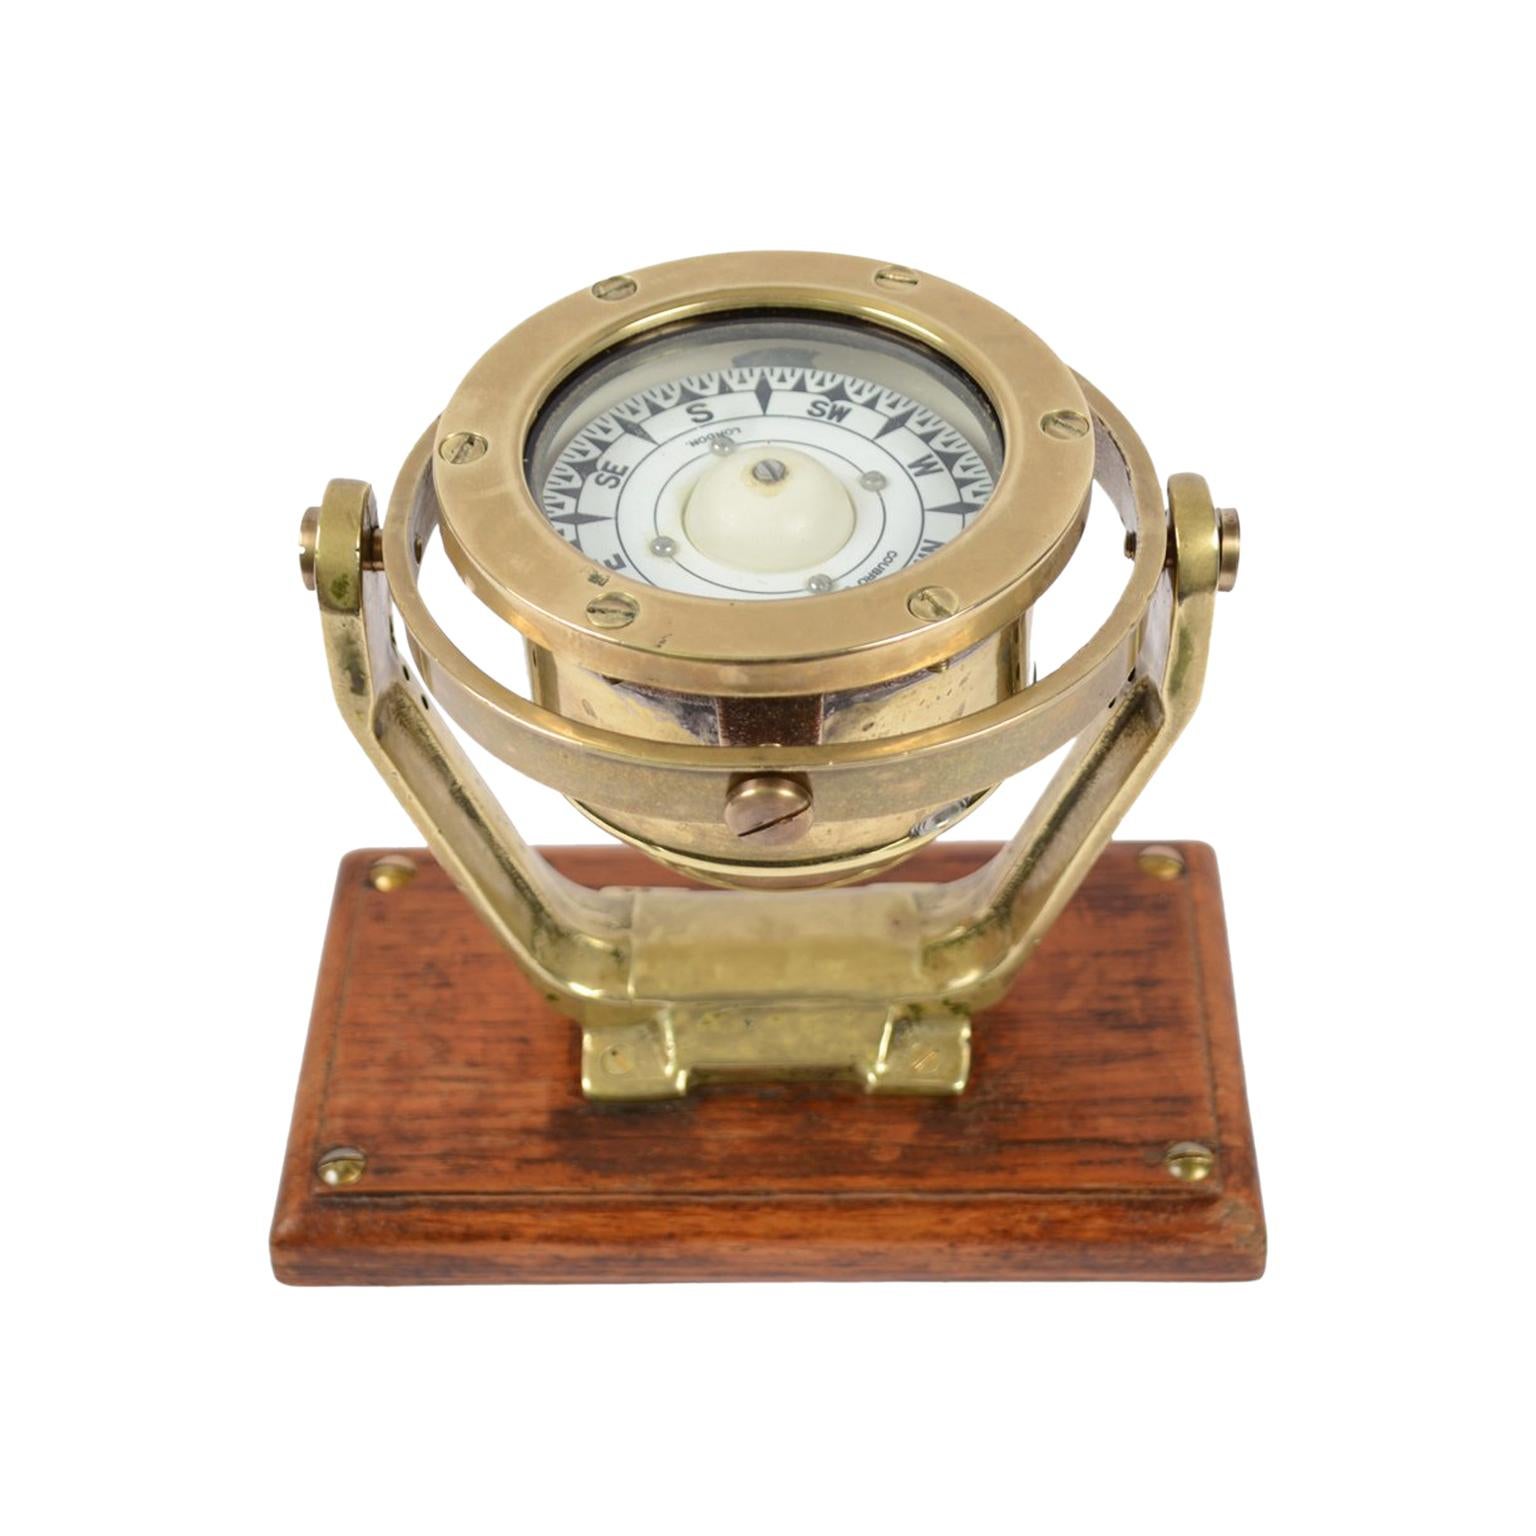 Brass and Glass Nautical Compass on Oak Wooden Board, London, 1860